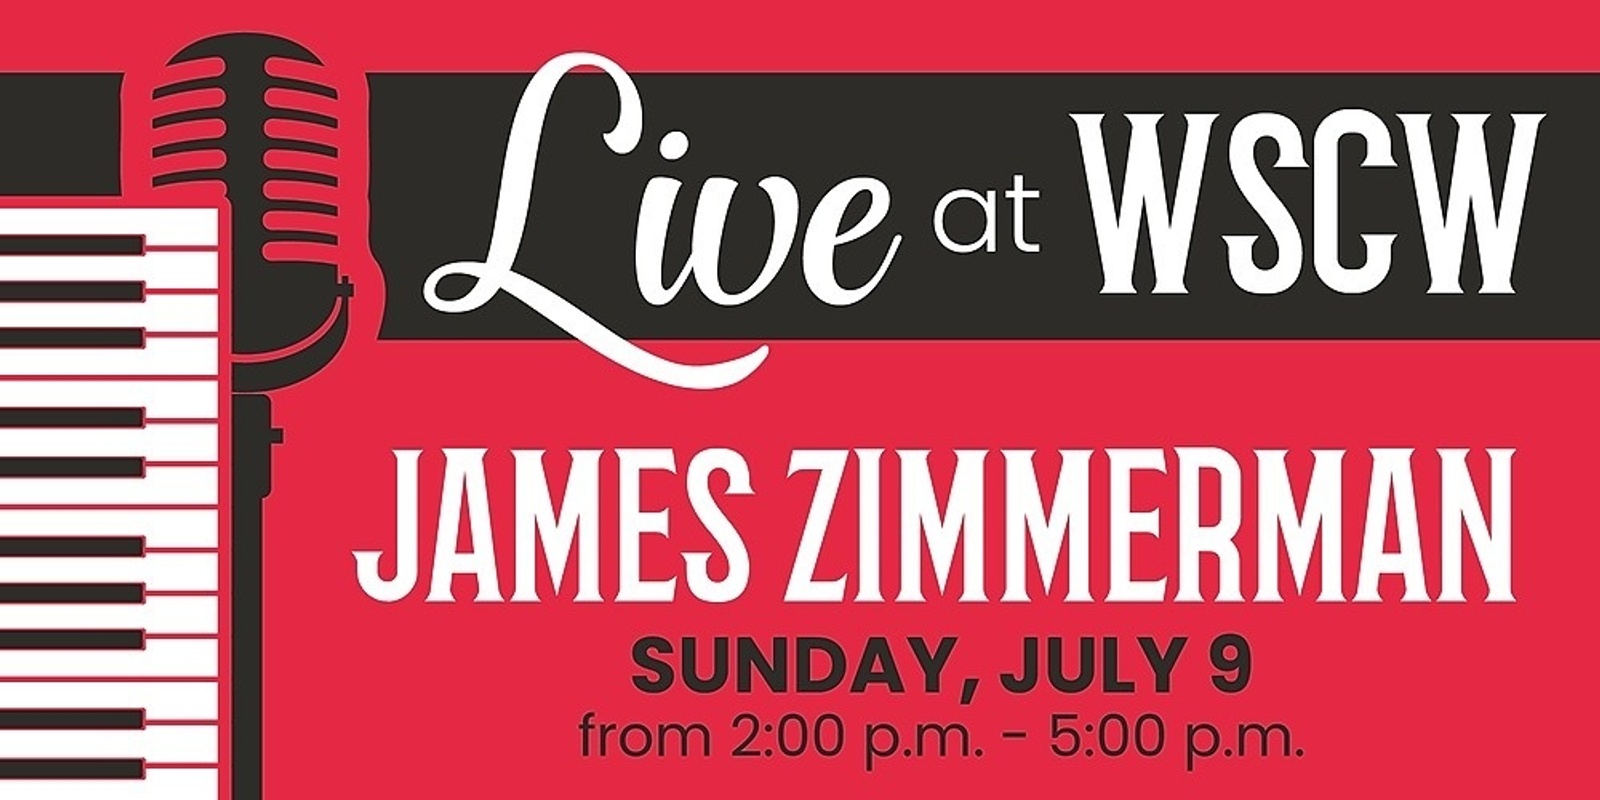 Banner image for James Zimmerman Live at WSCW July 9